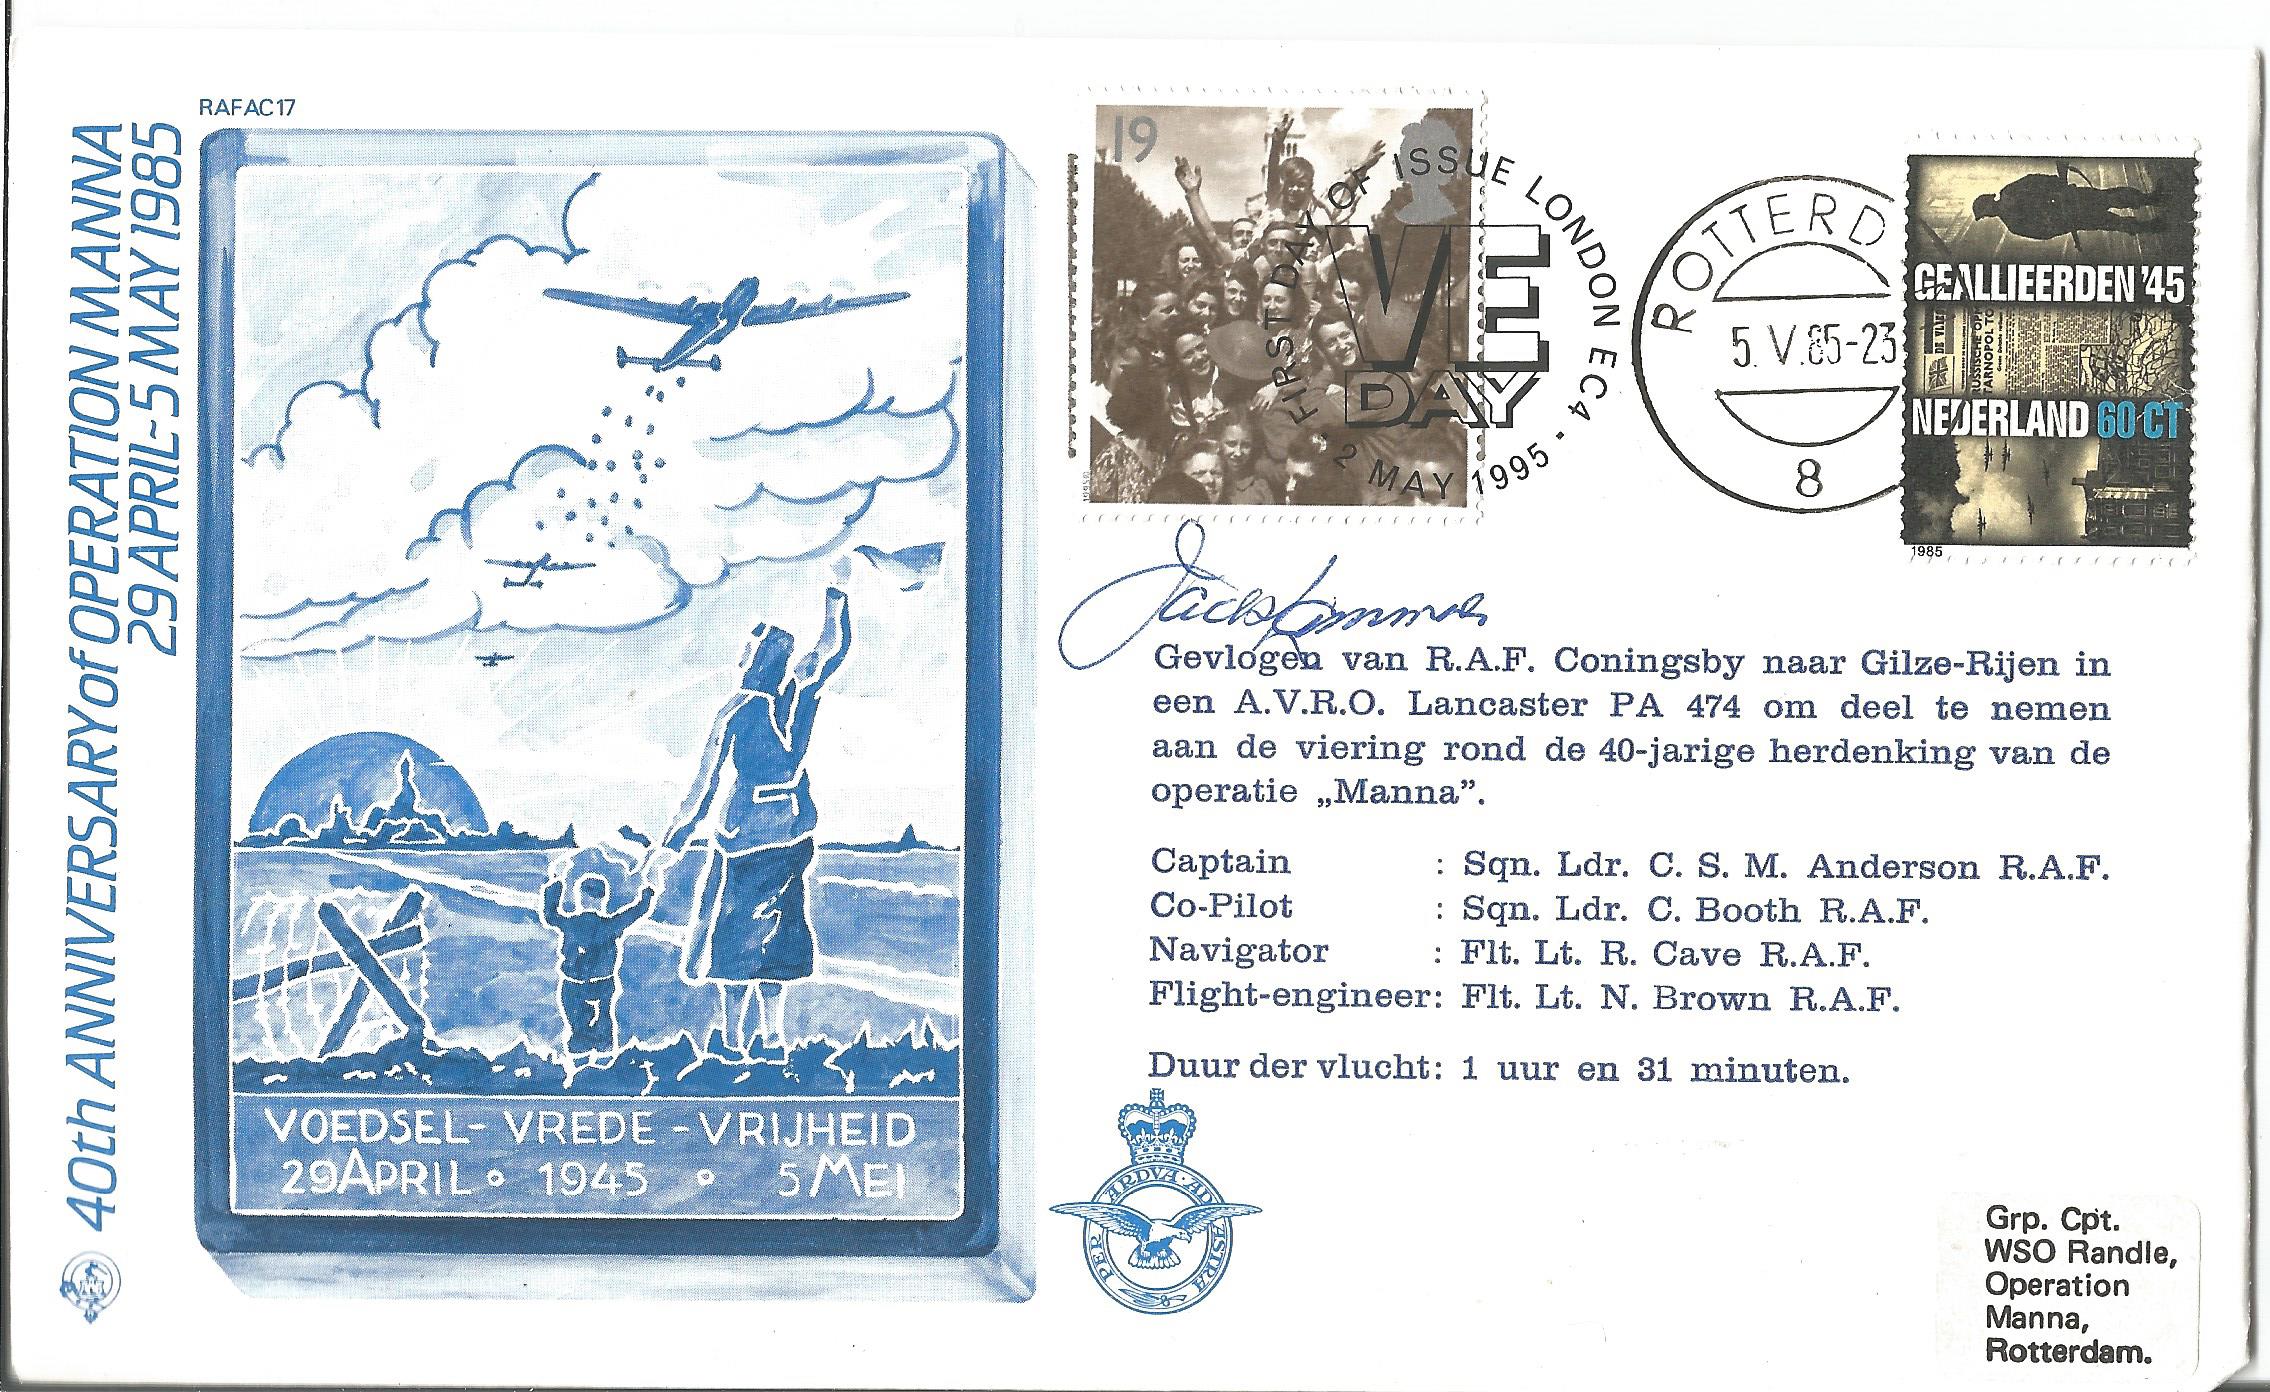 World War Two flown cover (RAFAC17) 40TH Anniversary Operation Manna 29th April -5th May 1985 signed